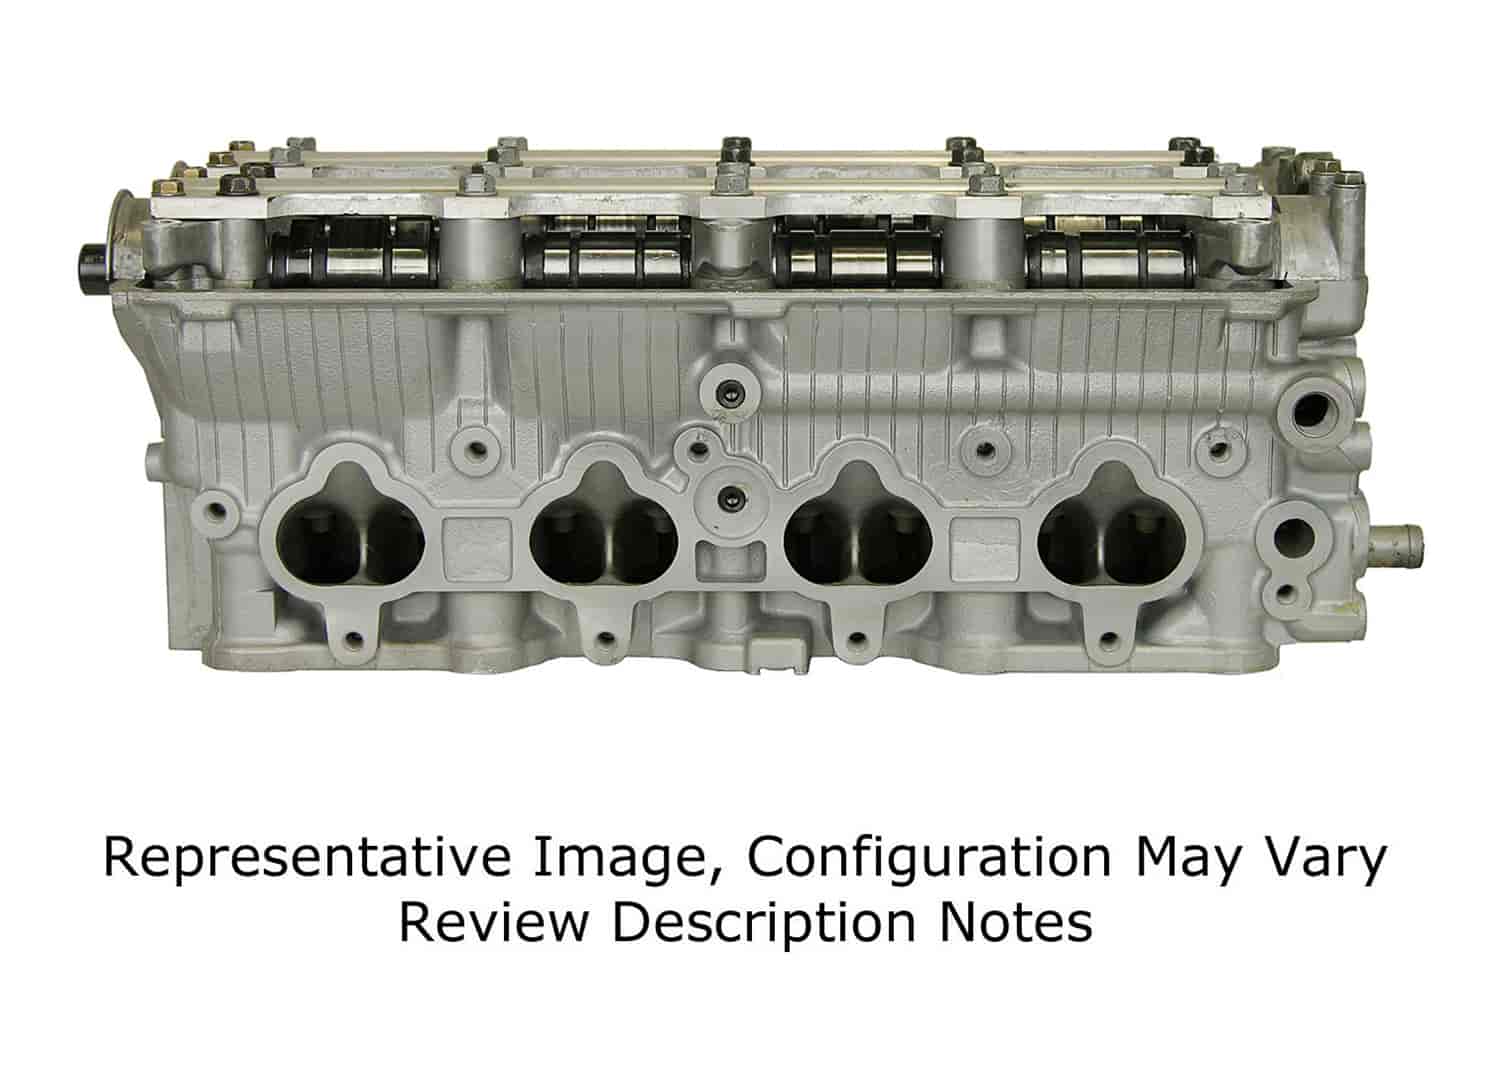 Remanufactured Cylinder Head for 1998-2001 Honda Prelude with 2.2L L4 H22A4